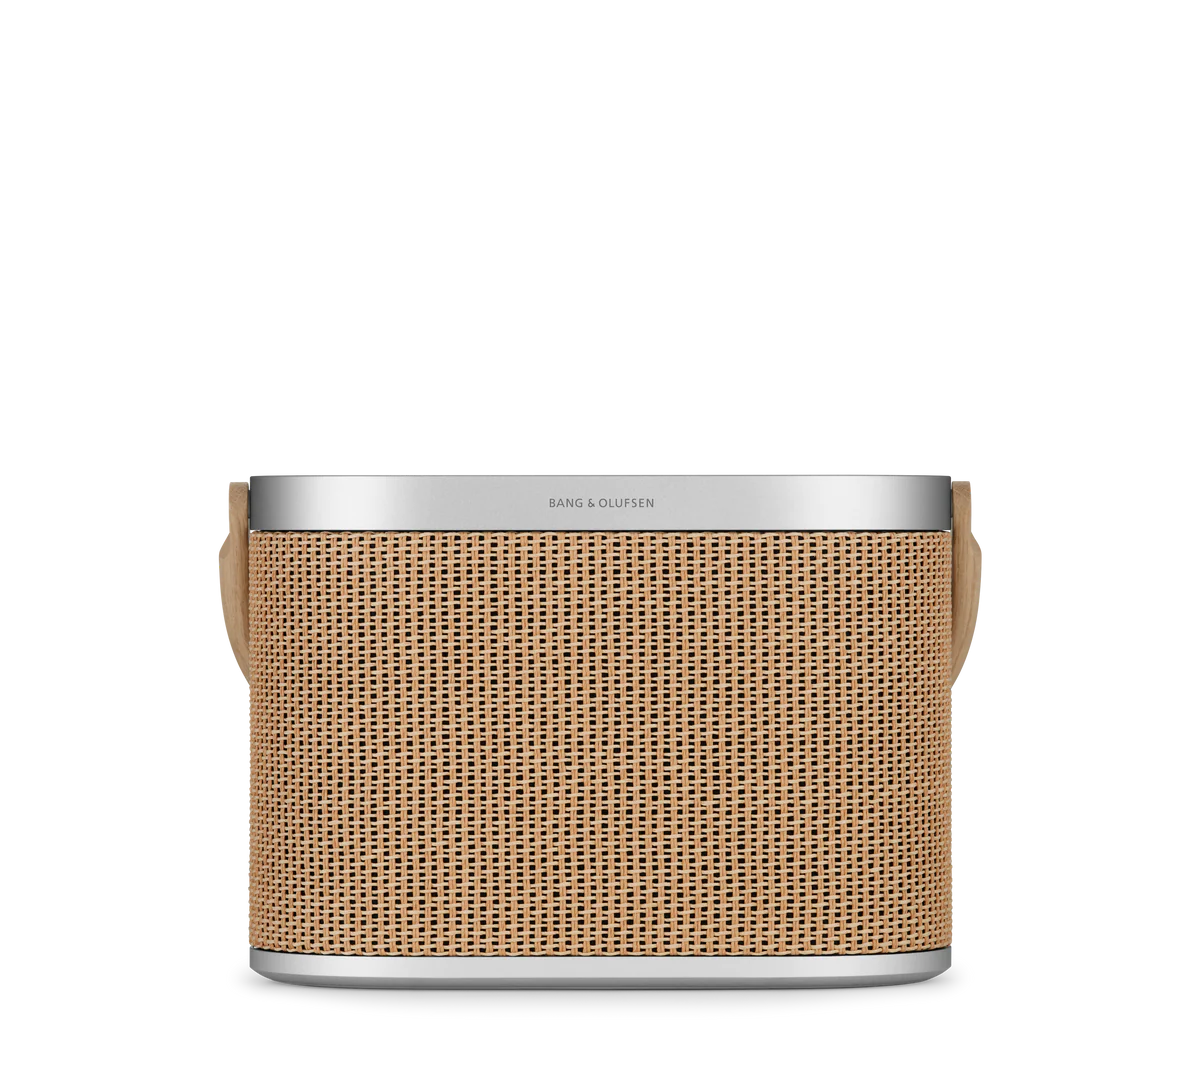 Beosound A5 Nordic Weave